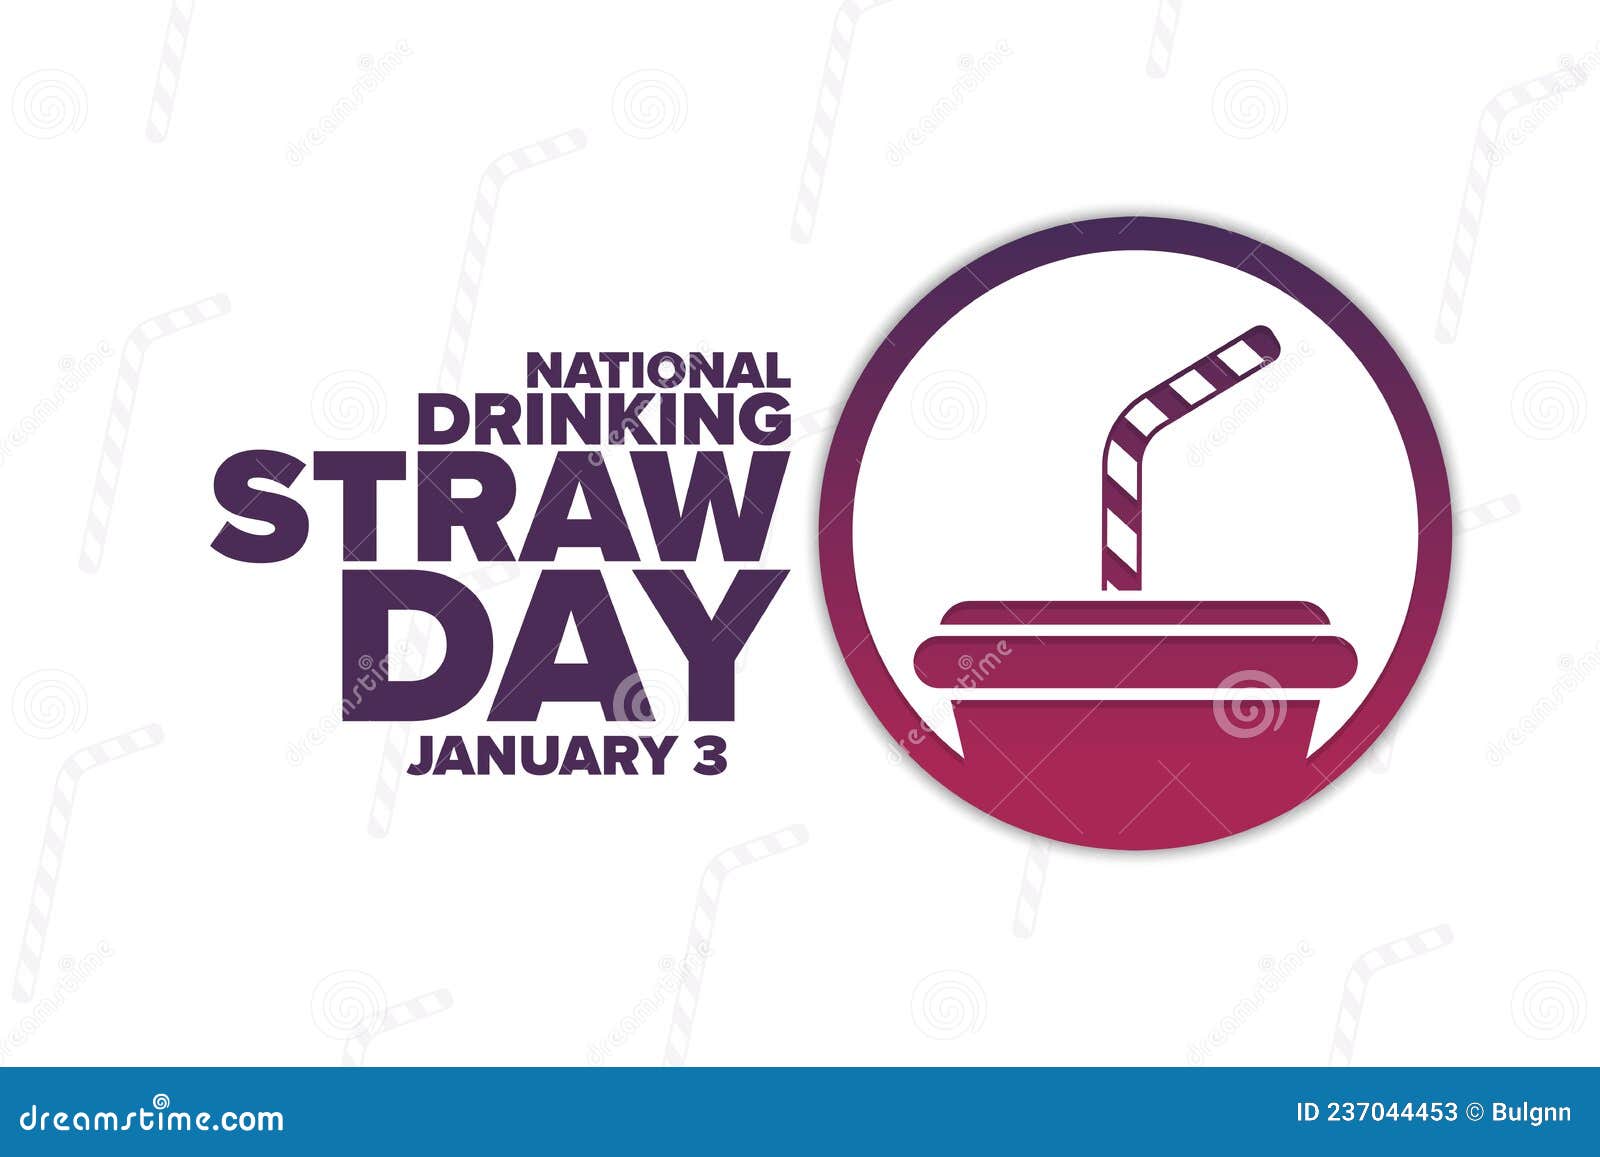 National Drinking Straw Day Icon Stock Photo 263882418